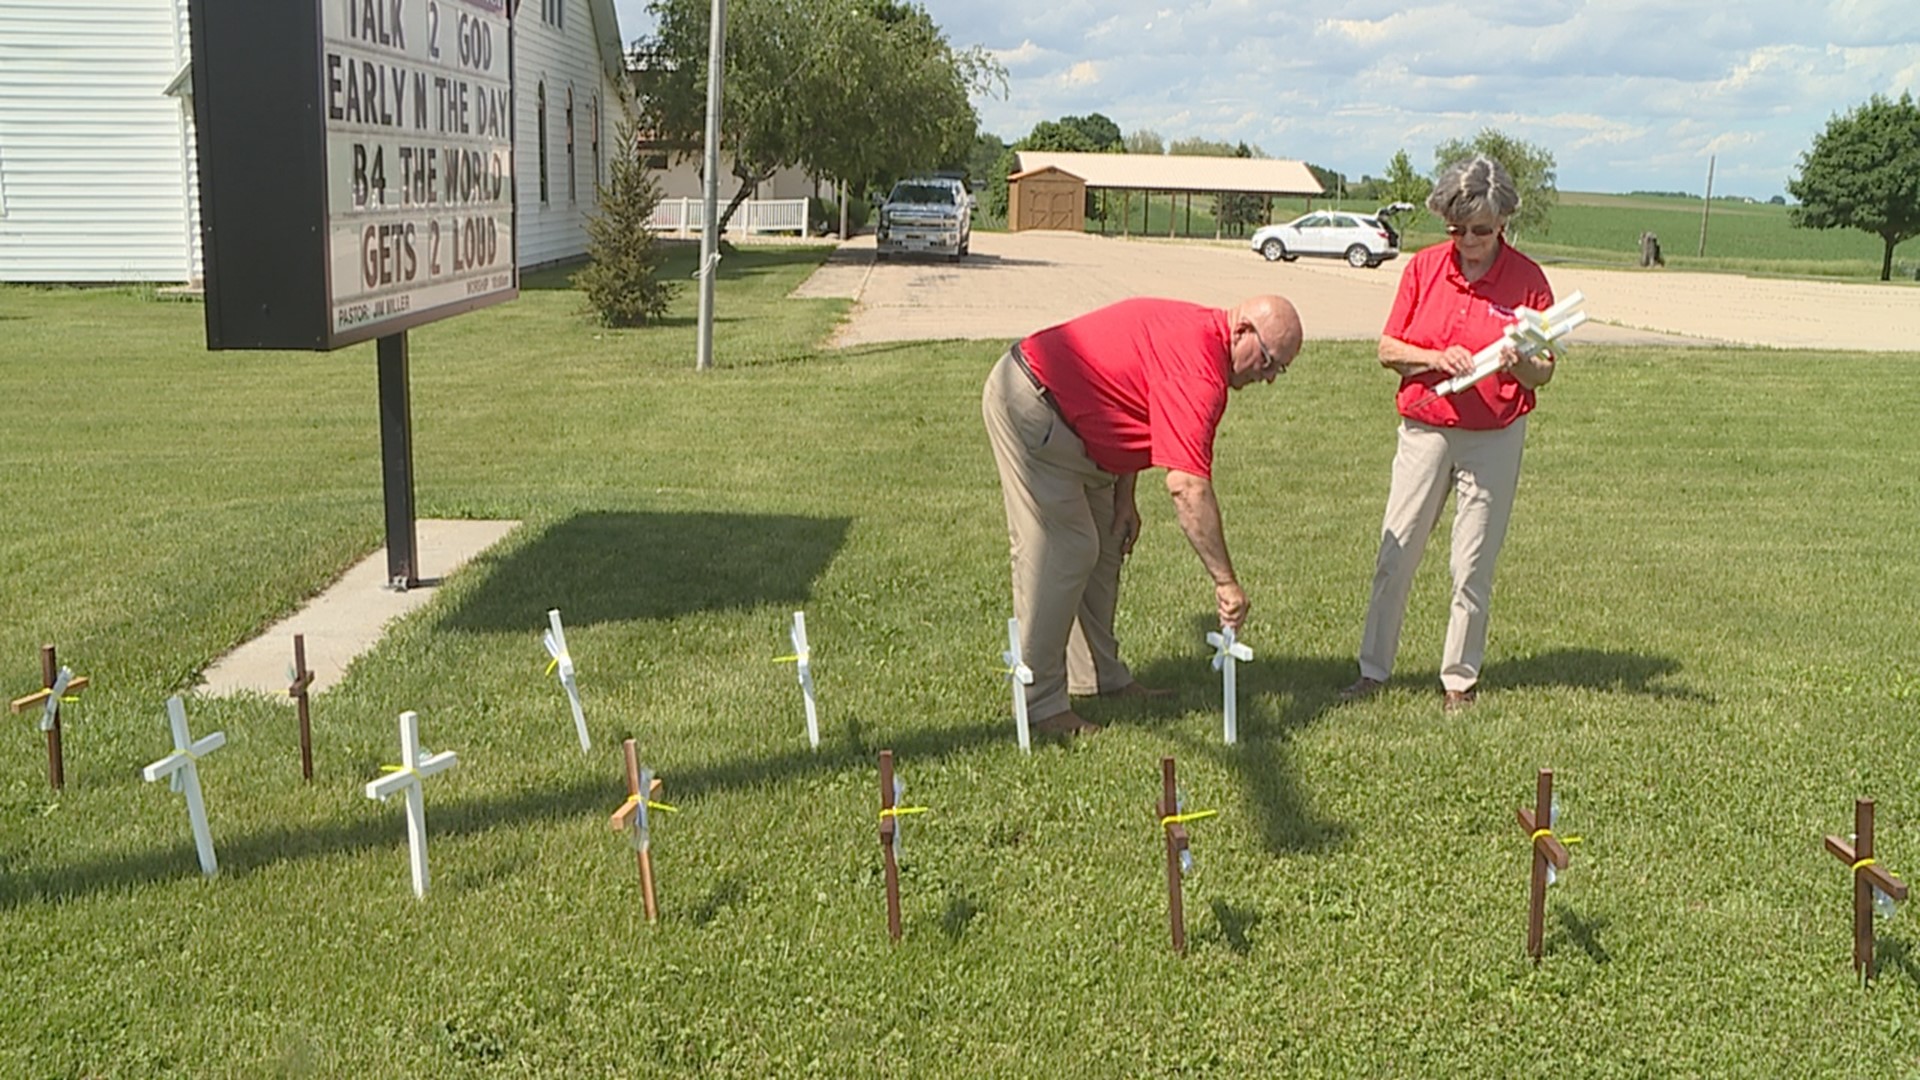 East Jordan United Methodist Church in Sterling has been constructing and giving away crosses for community members to put in their yard in support of Ukraine.